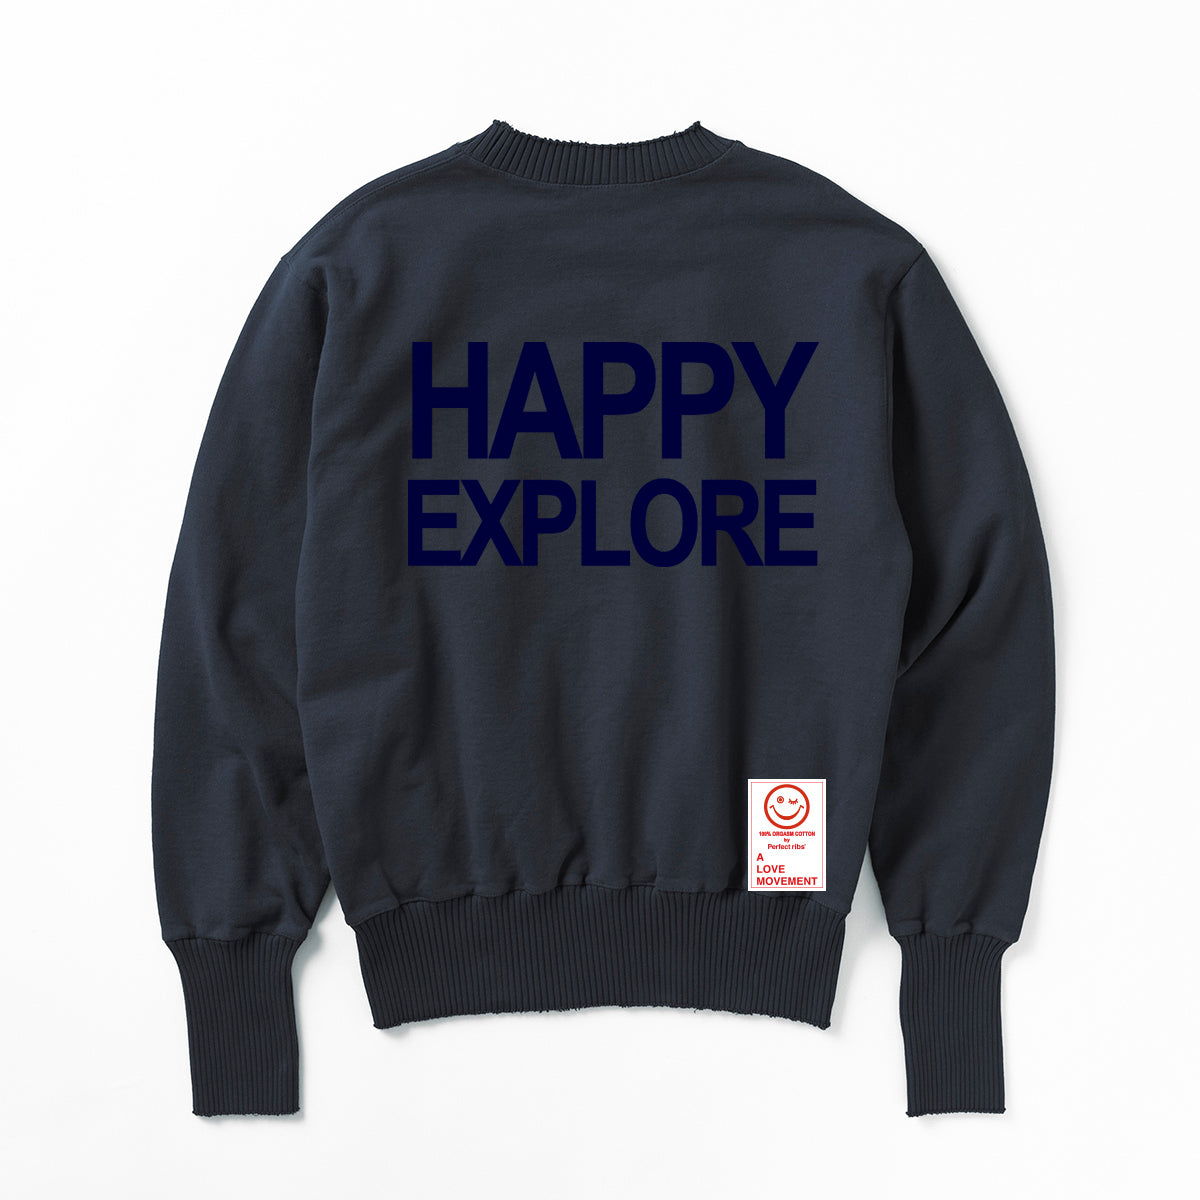 Exclusive Color【Perfect ribs×A LOVE MOVEMENT】"HAPPY EXPLORE" Basic Crew Neck Sweat Shirt / Vintage Black×Ink Blue (ベーシック クルーネック スウェット/ヴィンテージブラック×インクブルー)